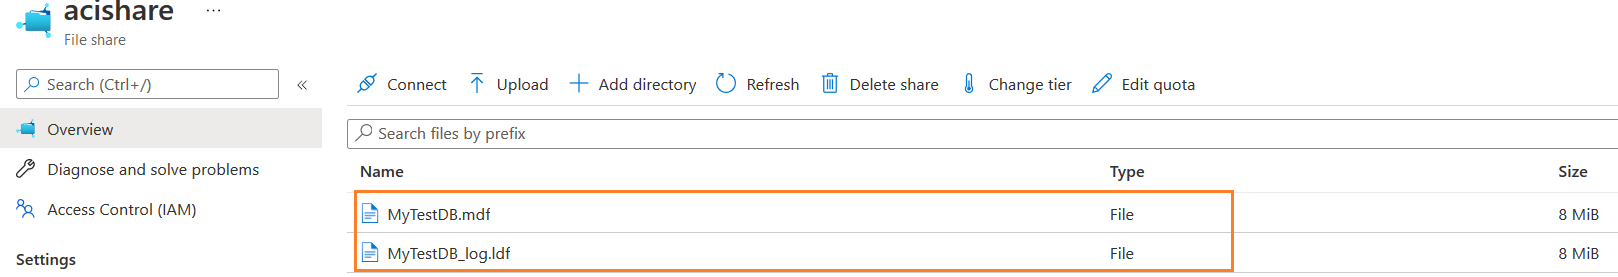 Azure file share contains DB files